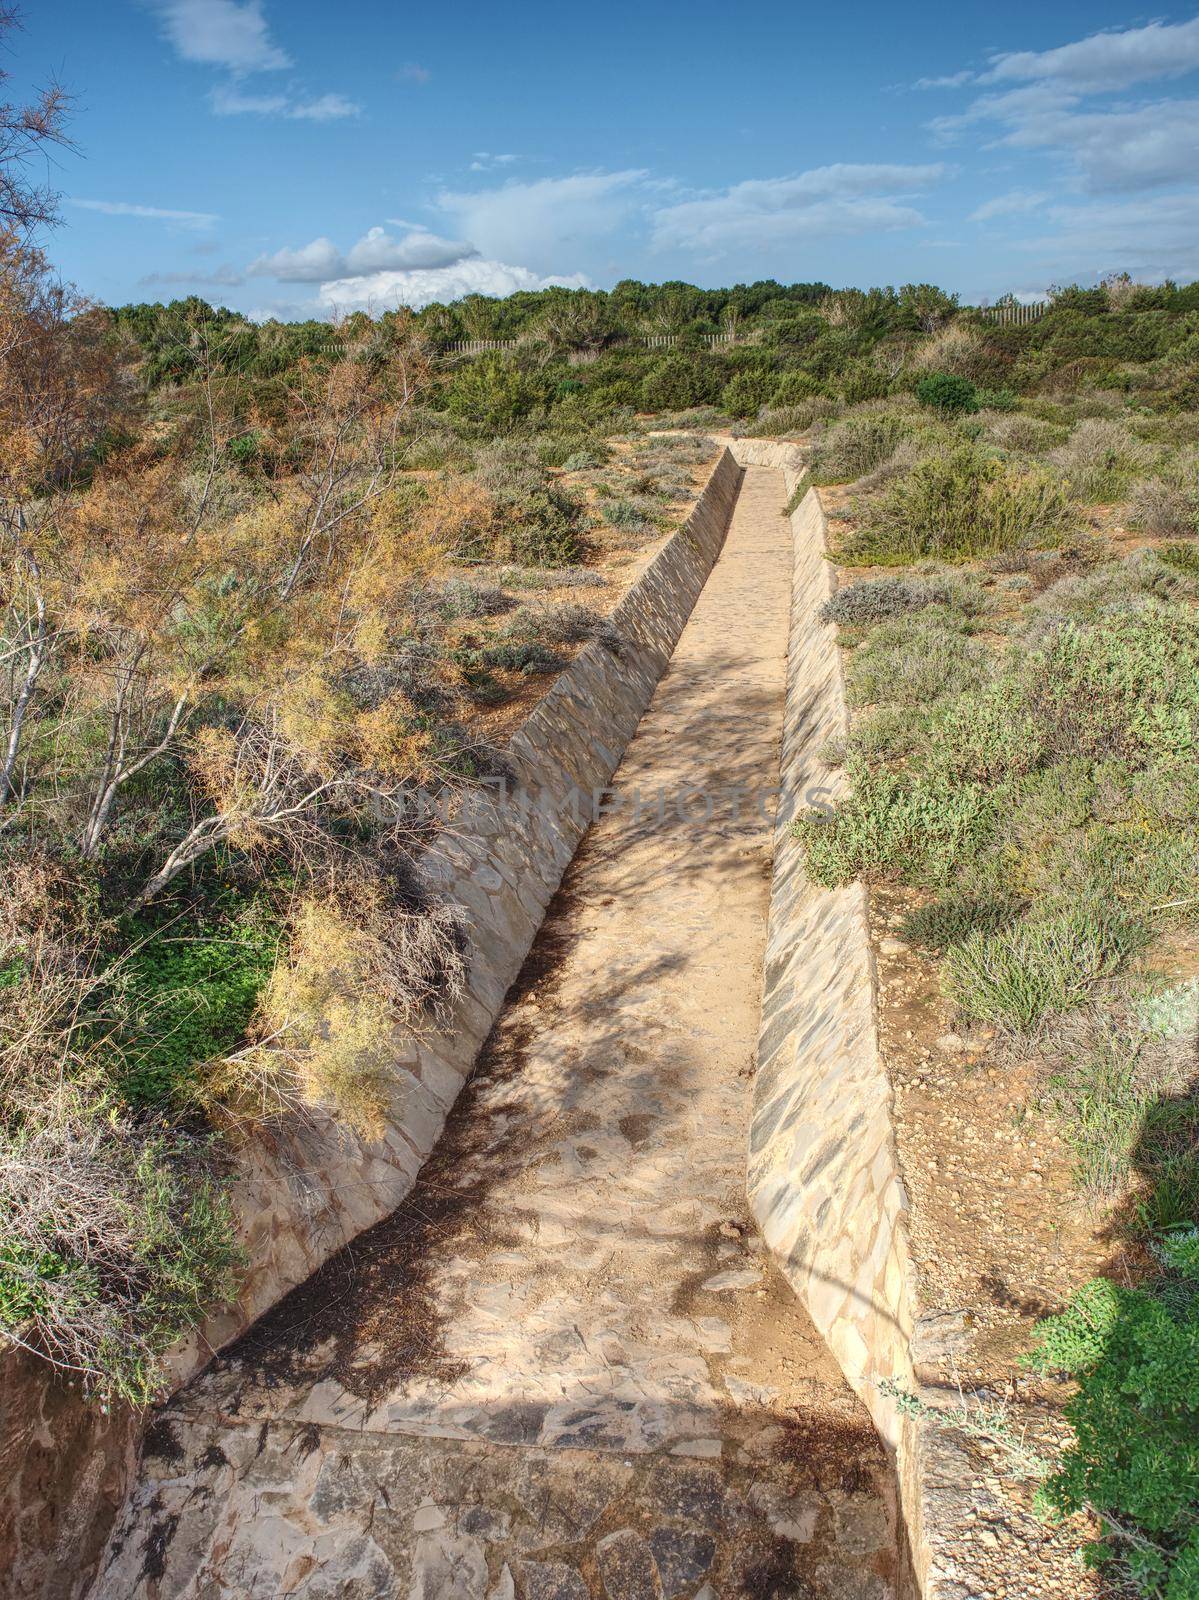 Close up of dry concrete drained channel,  by rdonar2